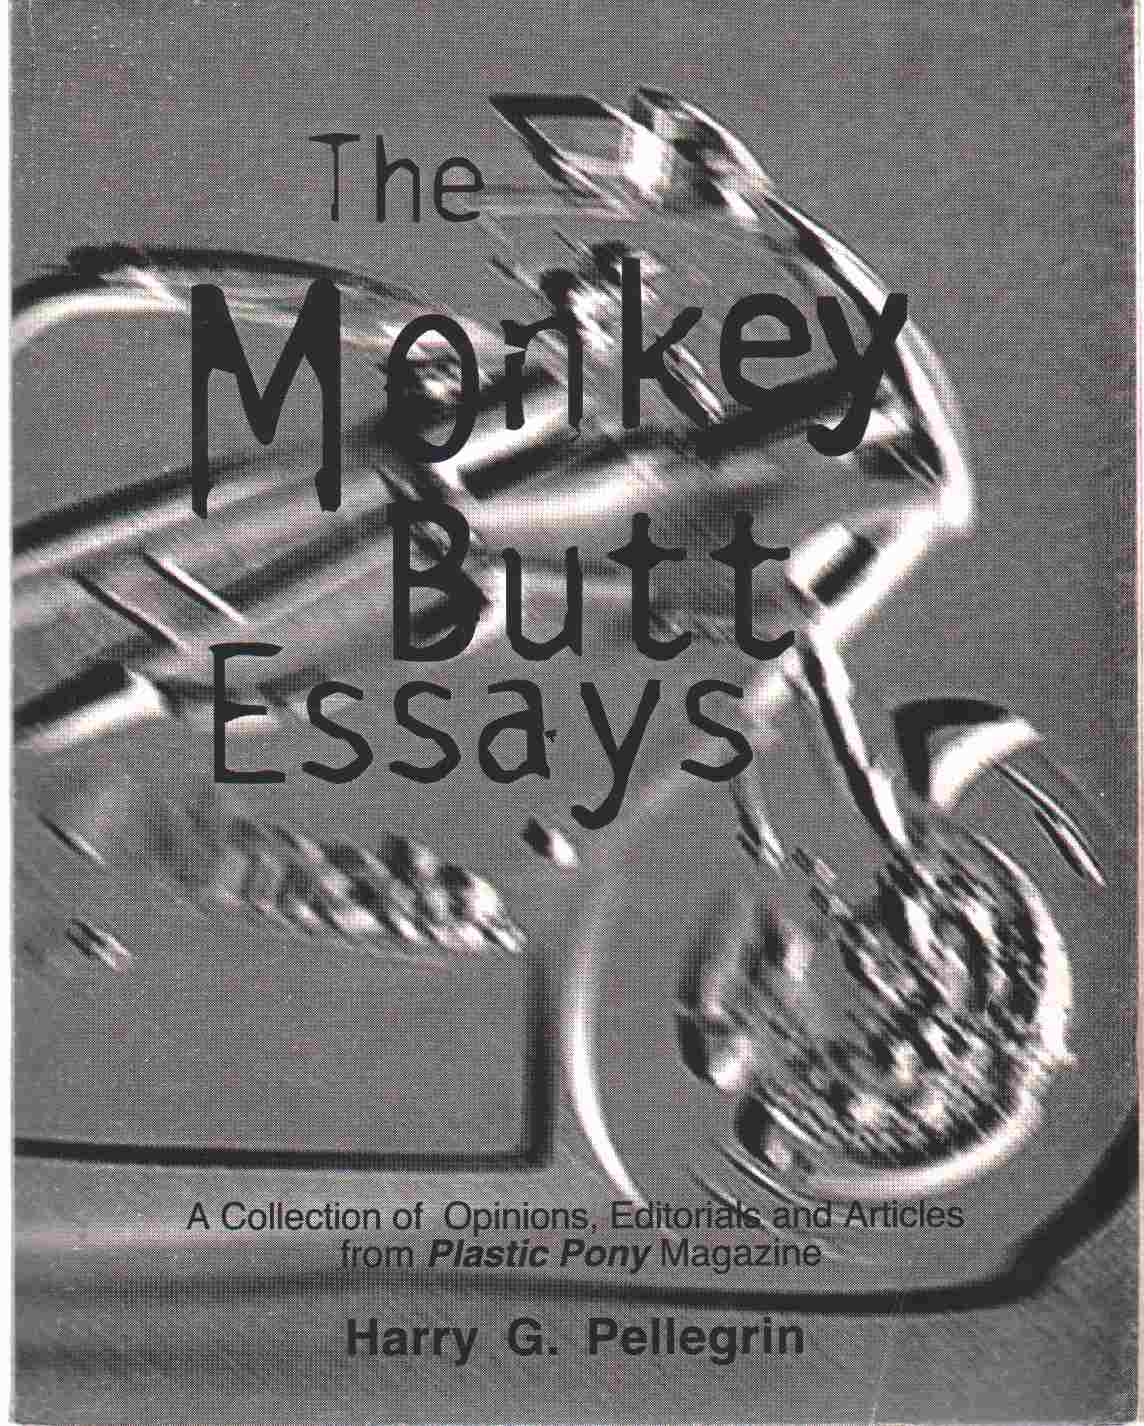 Pellegrin, Harry G. - THE MONKEY BUTT ESSAYS A Collection of Opinions, Editorials and Articles from Plastic Pony Magazine